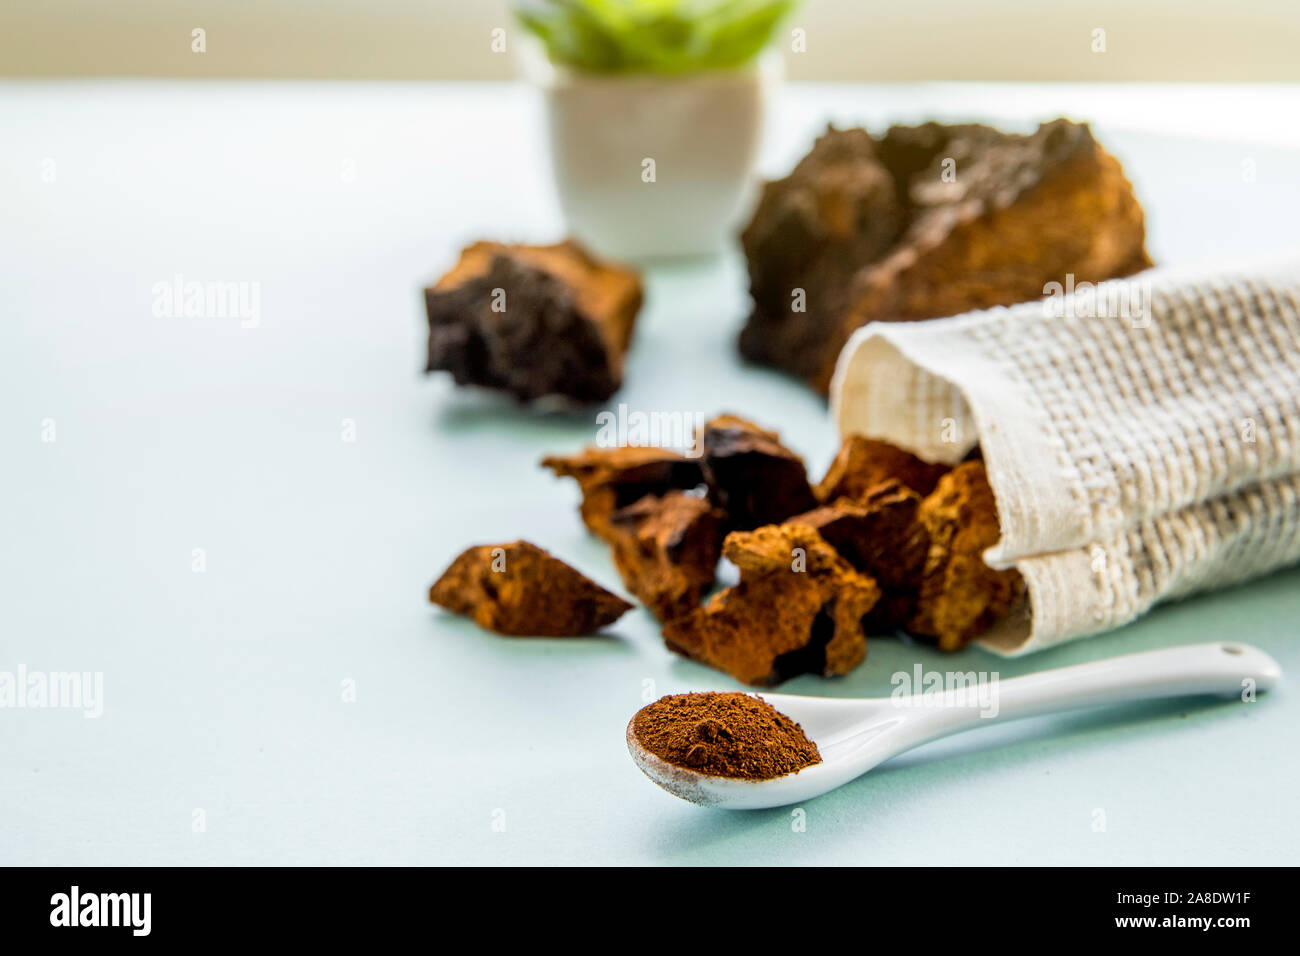 Side view of wild natural chaga mushroom, Inonotus obliquus powder and pieces for making tea and coffee on light blue background. Healthy herbal plant Stock Photo